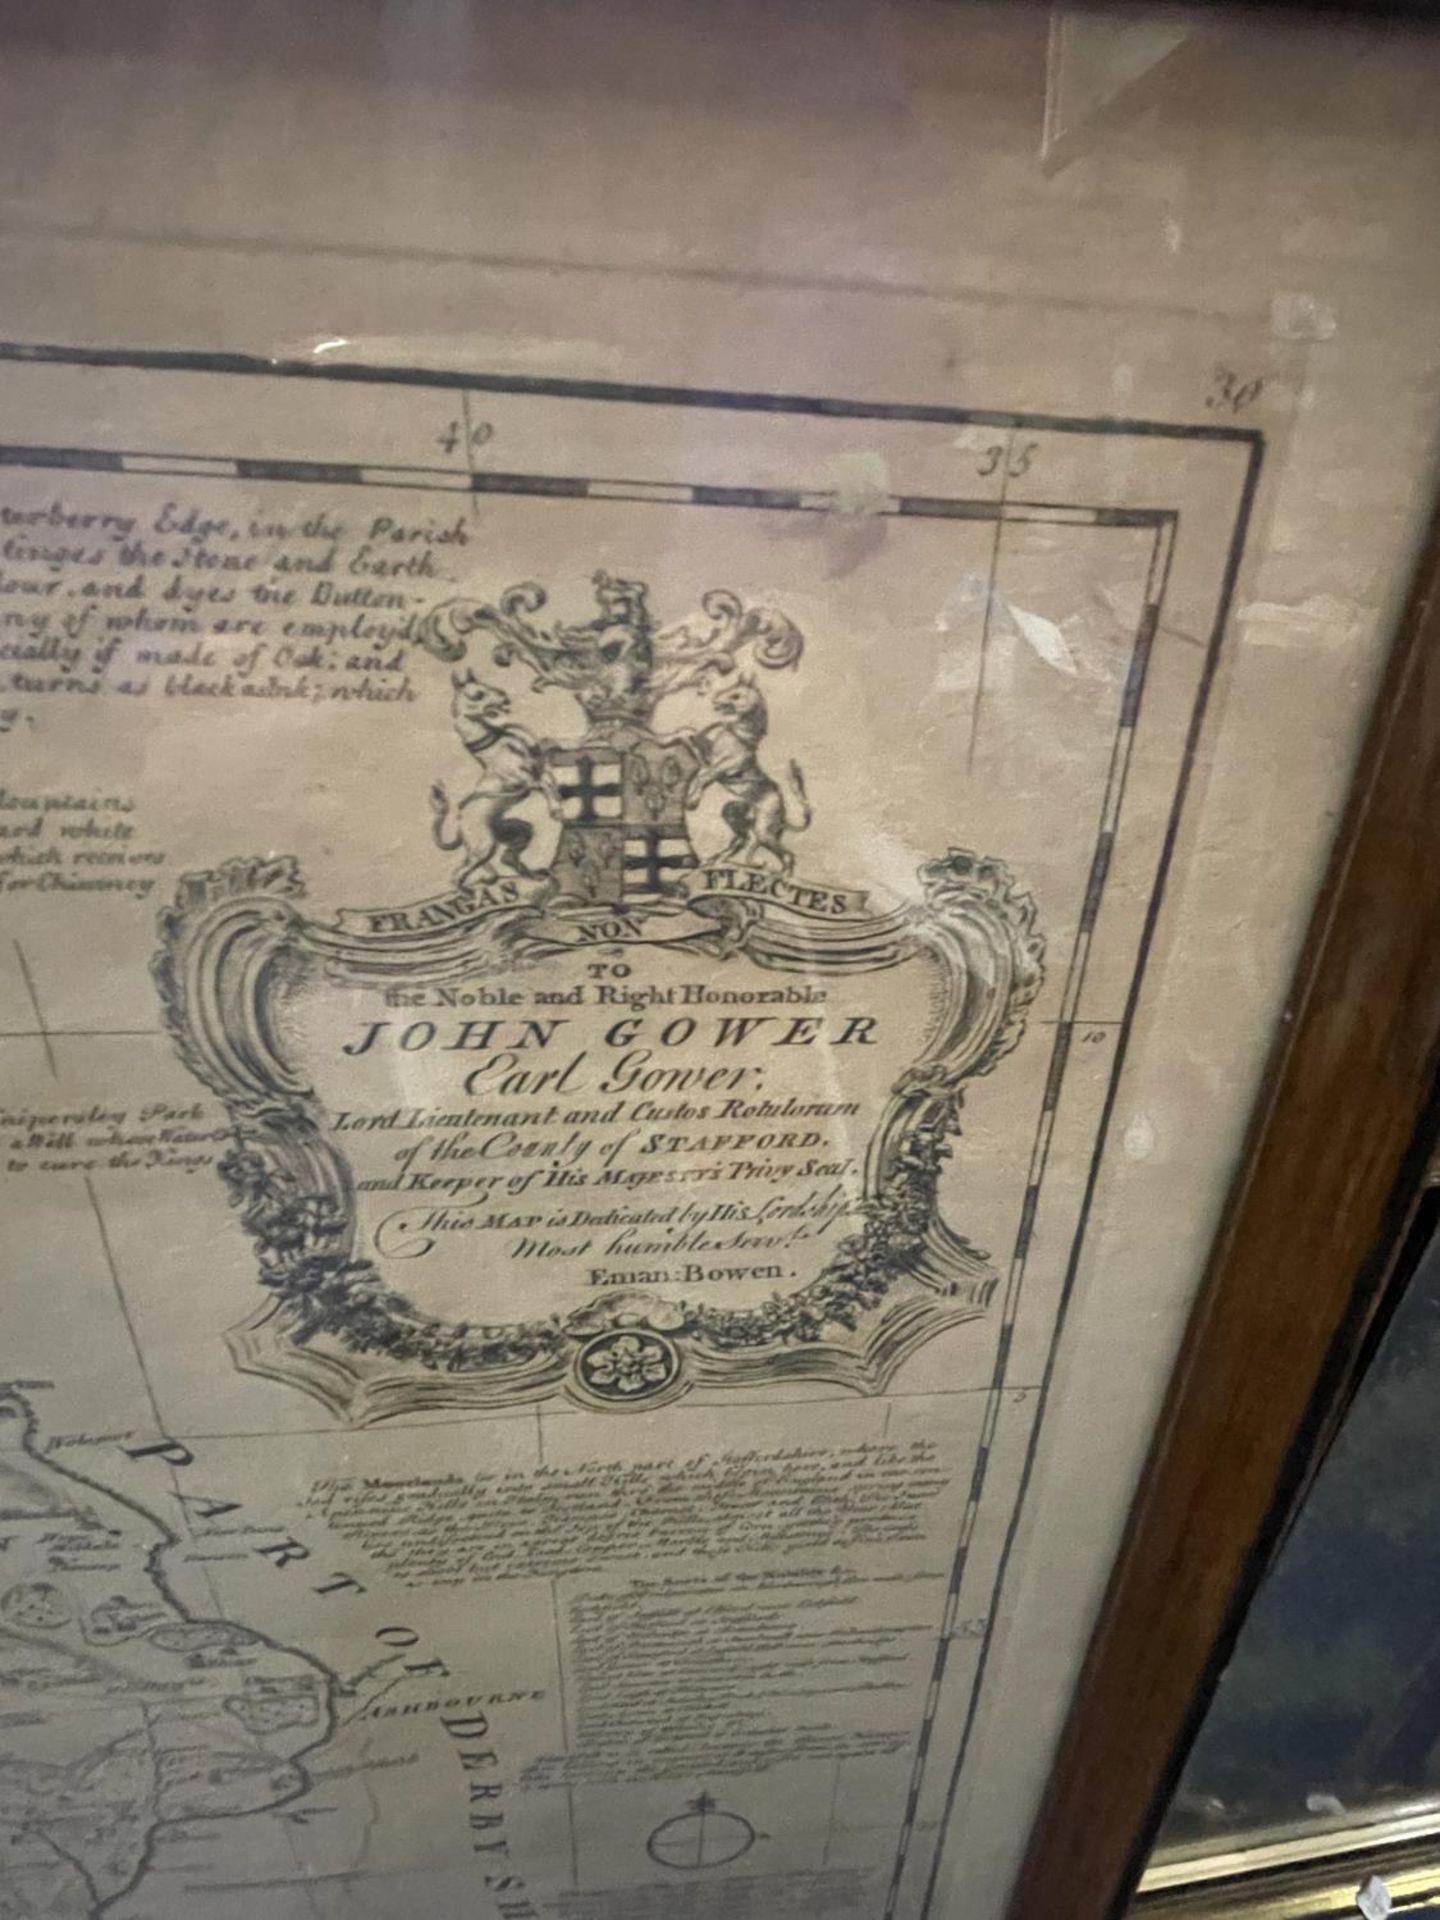 A FRAMED VINTAGE MAP OF PART OF CHESHIRE AND SHROPSHIRE, TO THE NOBLE AND RIGHT HONORABLE JOHN GOWER - Image 2 of 3